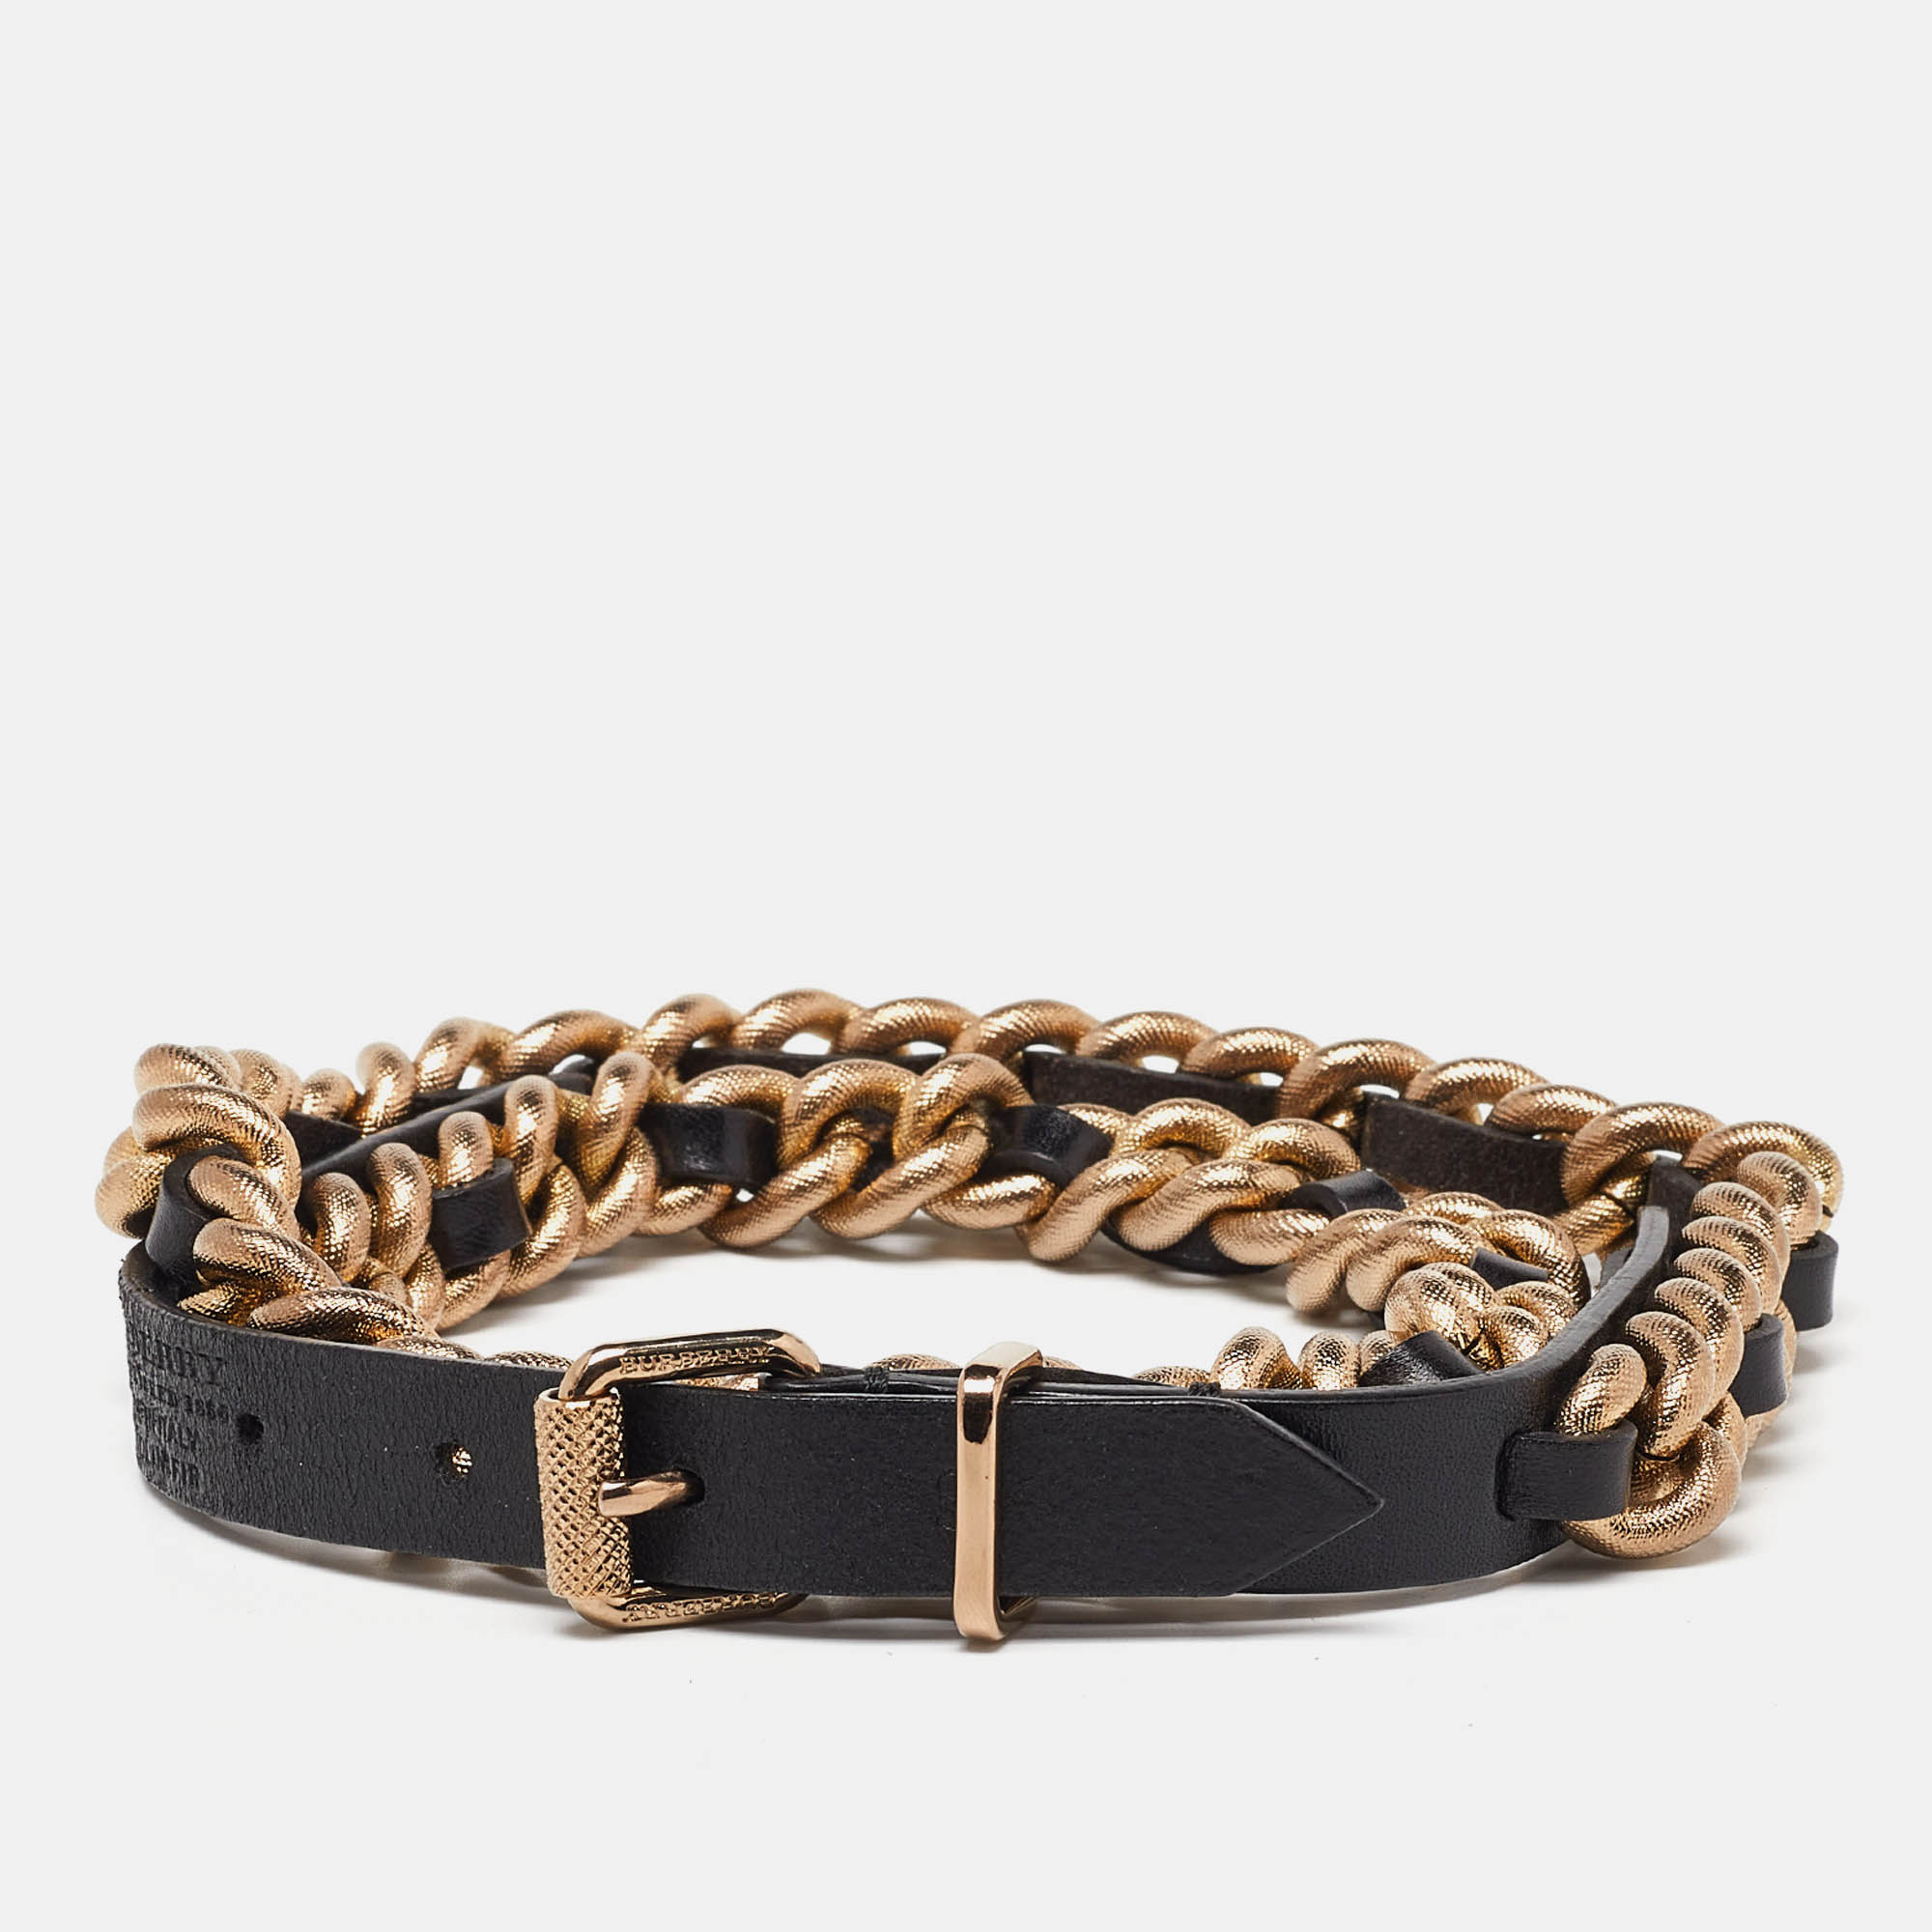 Burberry black/gold leather and chain waist belt s